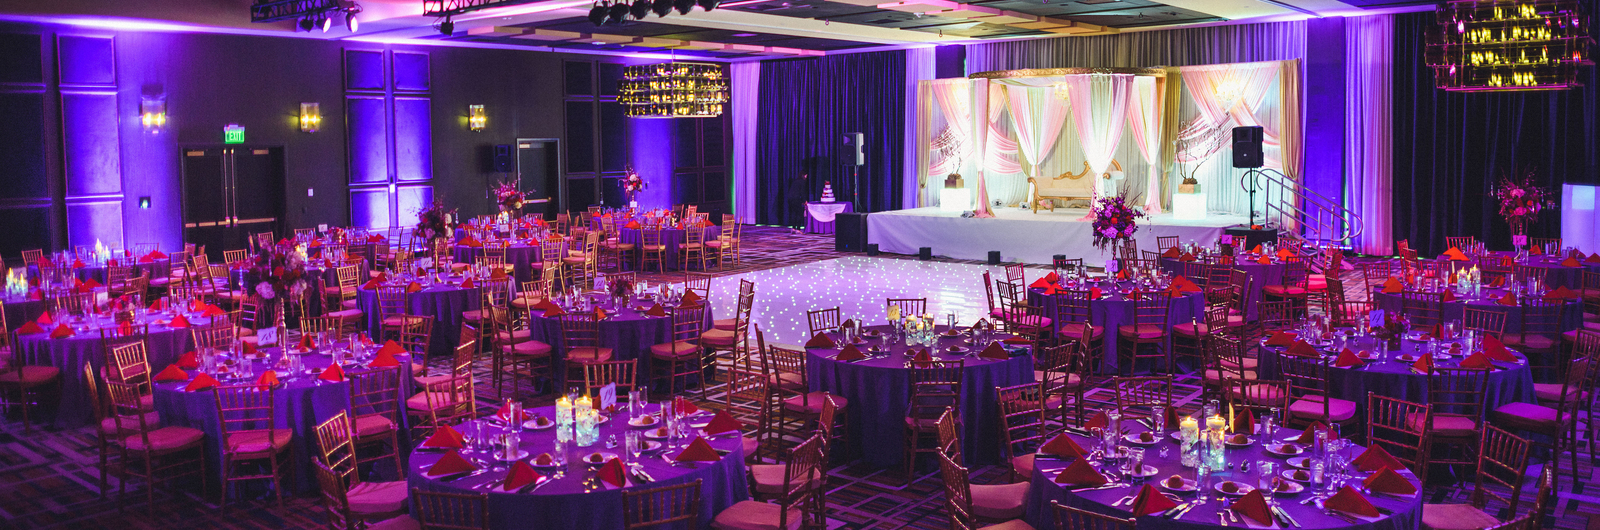 rivers casino event space renovations pittsburgh